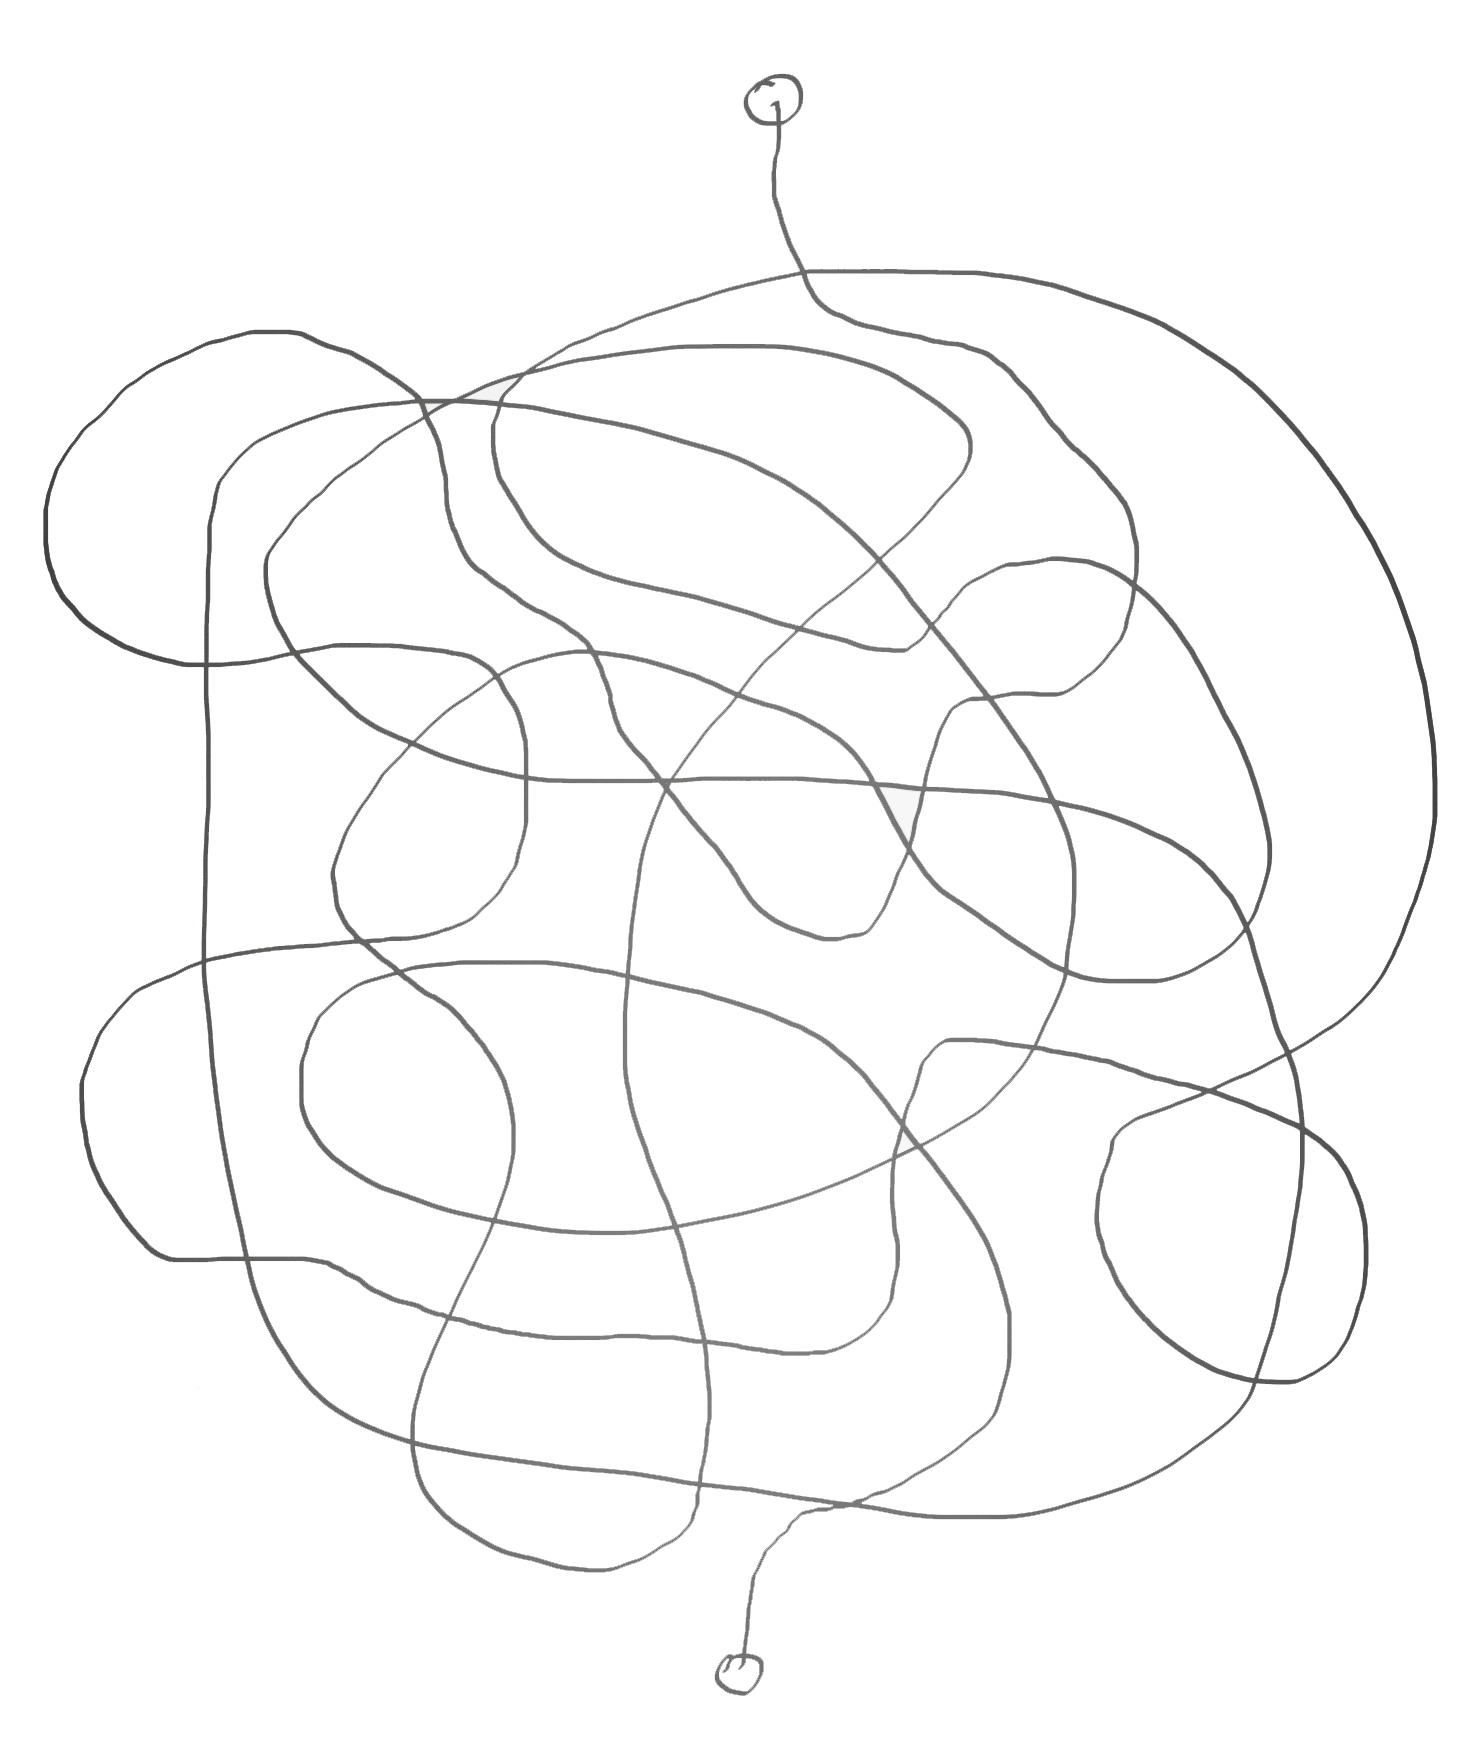 rouch sketch of a maze